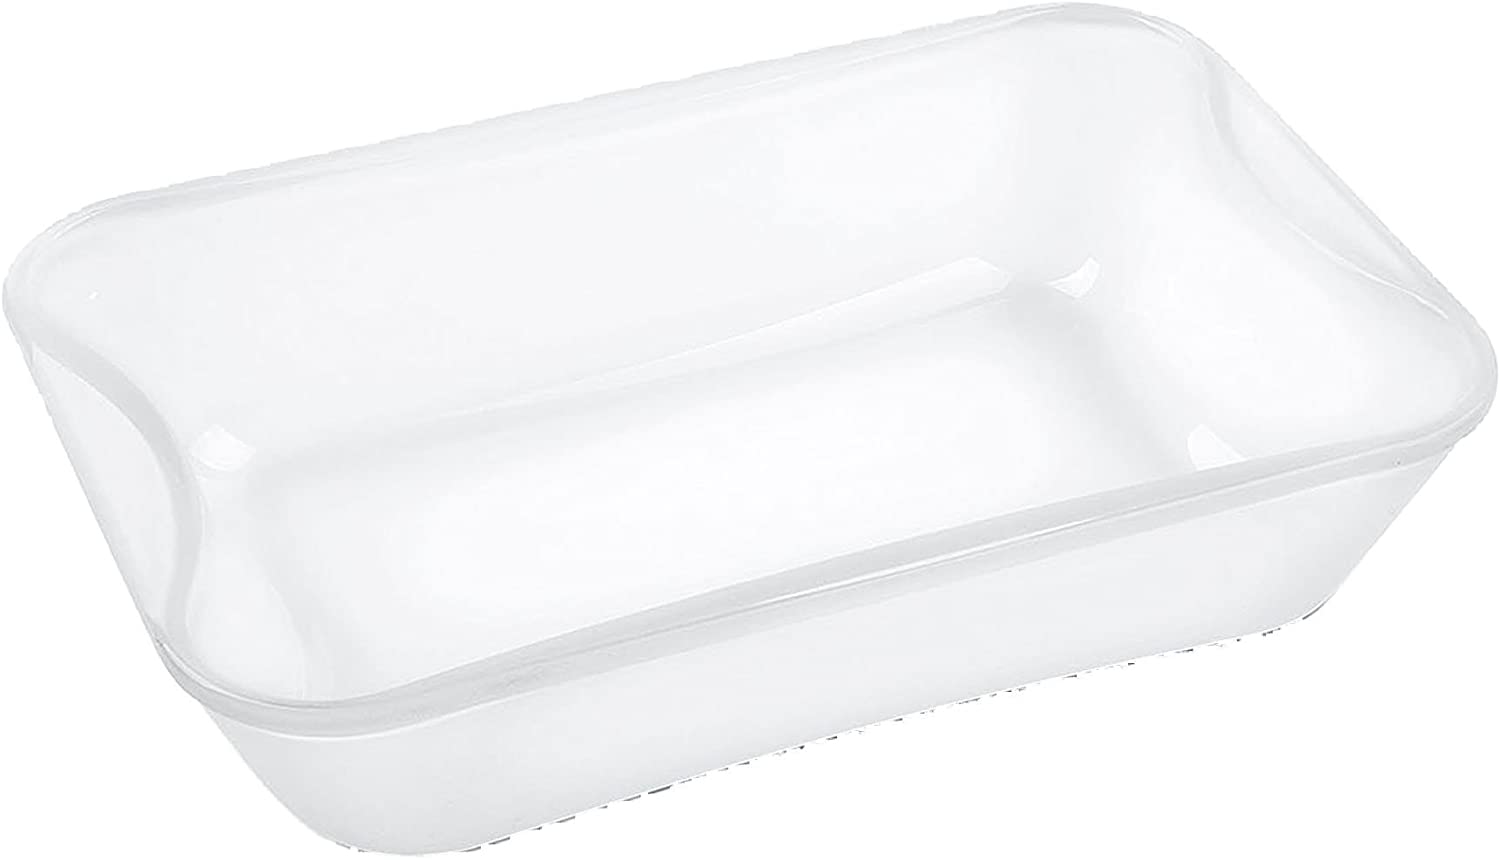 Bohemia Cristal 093 012 303 Play of colors Cooking Frying and Baking Dish Rectangular Approx. 1.5 Litre Made From Heat Resistant Borosilicate Glass Baking Dish 27 x 17.9 x 6.2 cm